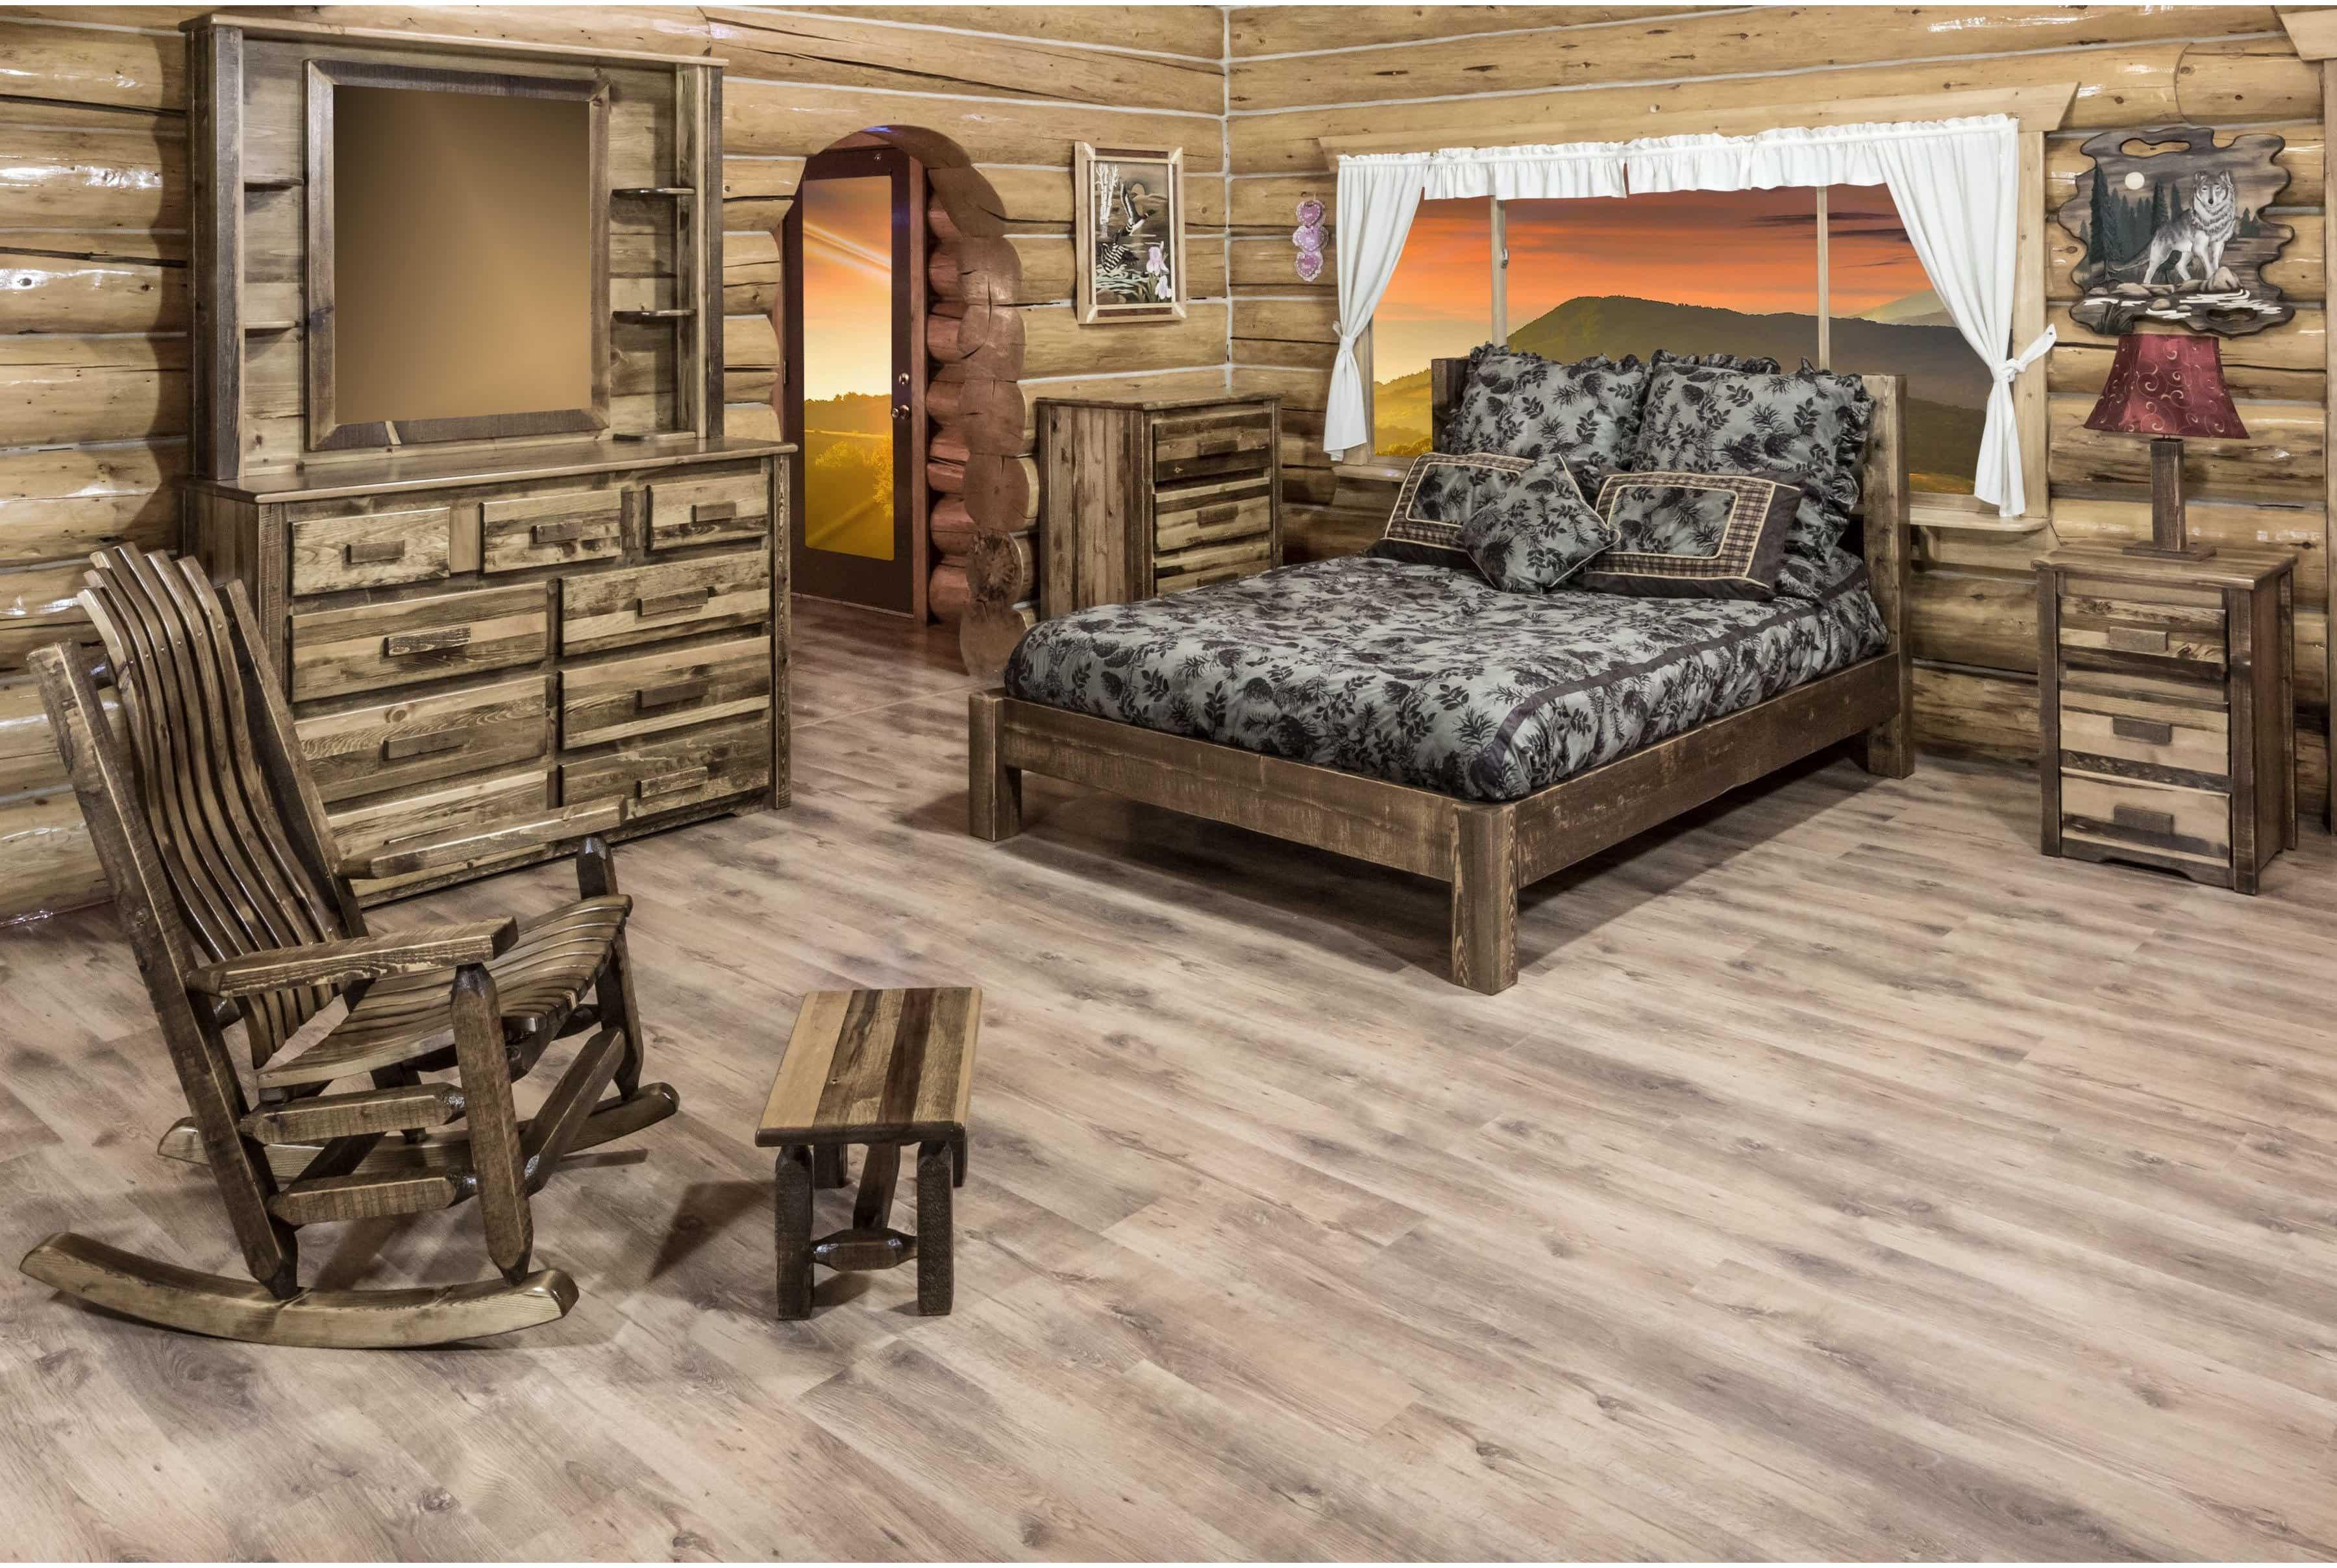 Montana Woodworks Homestead Collection Full Platform Bed-Rustic Furniture Marketplace